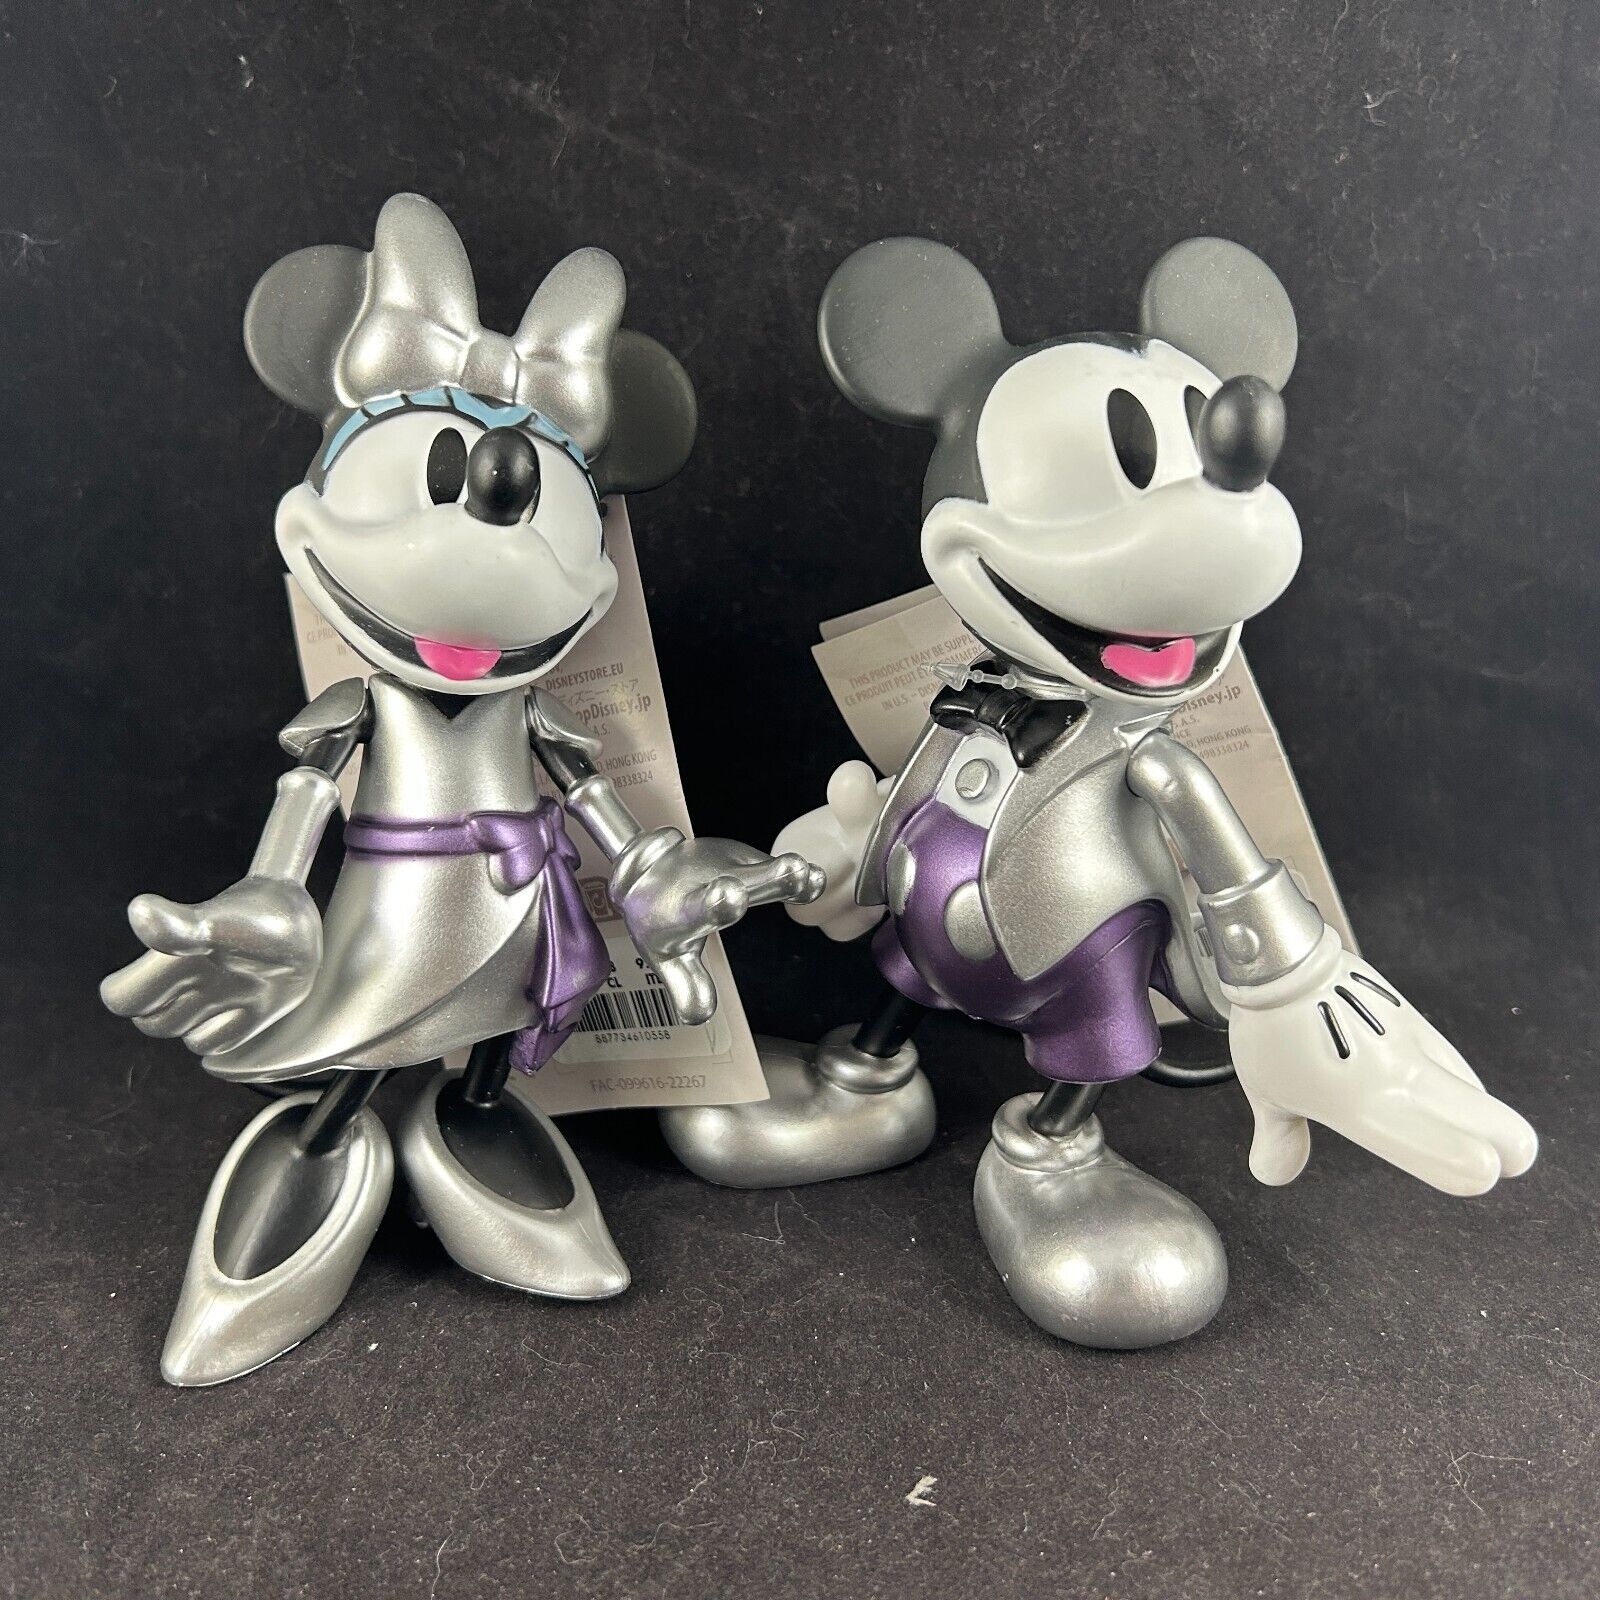 WALT DISNEY 100 YEARS OF WONDER MICKEY & MINNIE MOUSE ARTICULATED FIGURE SET NWT